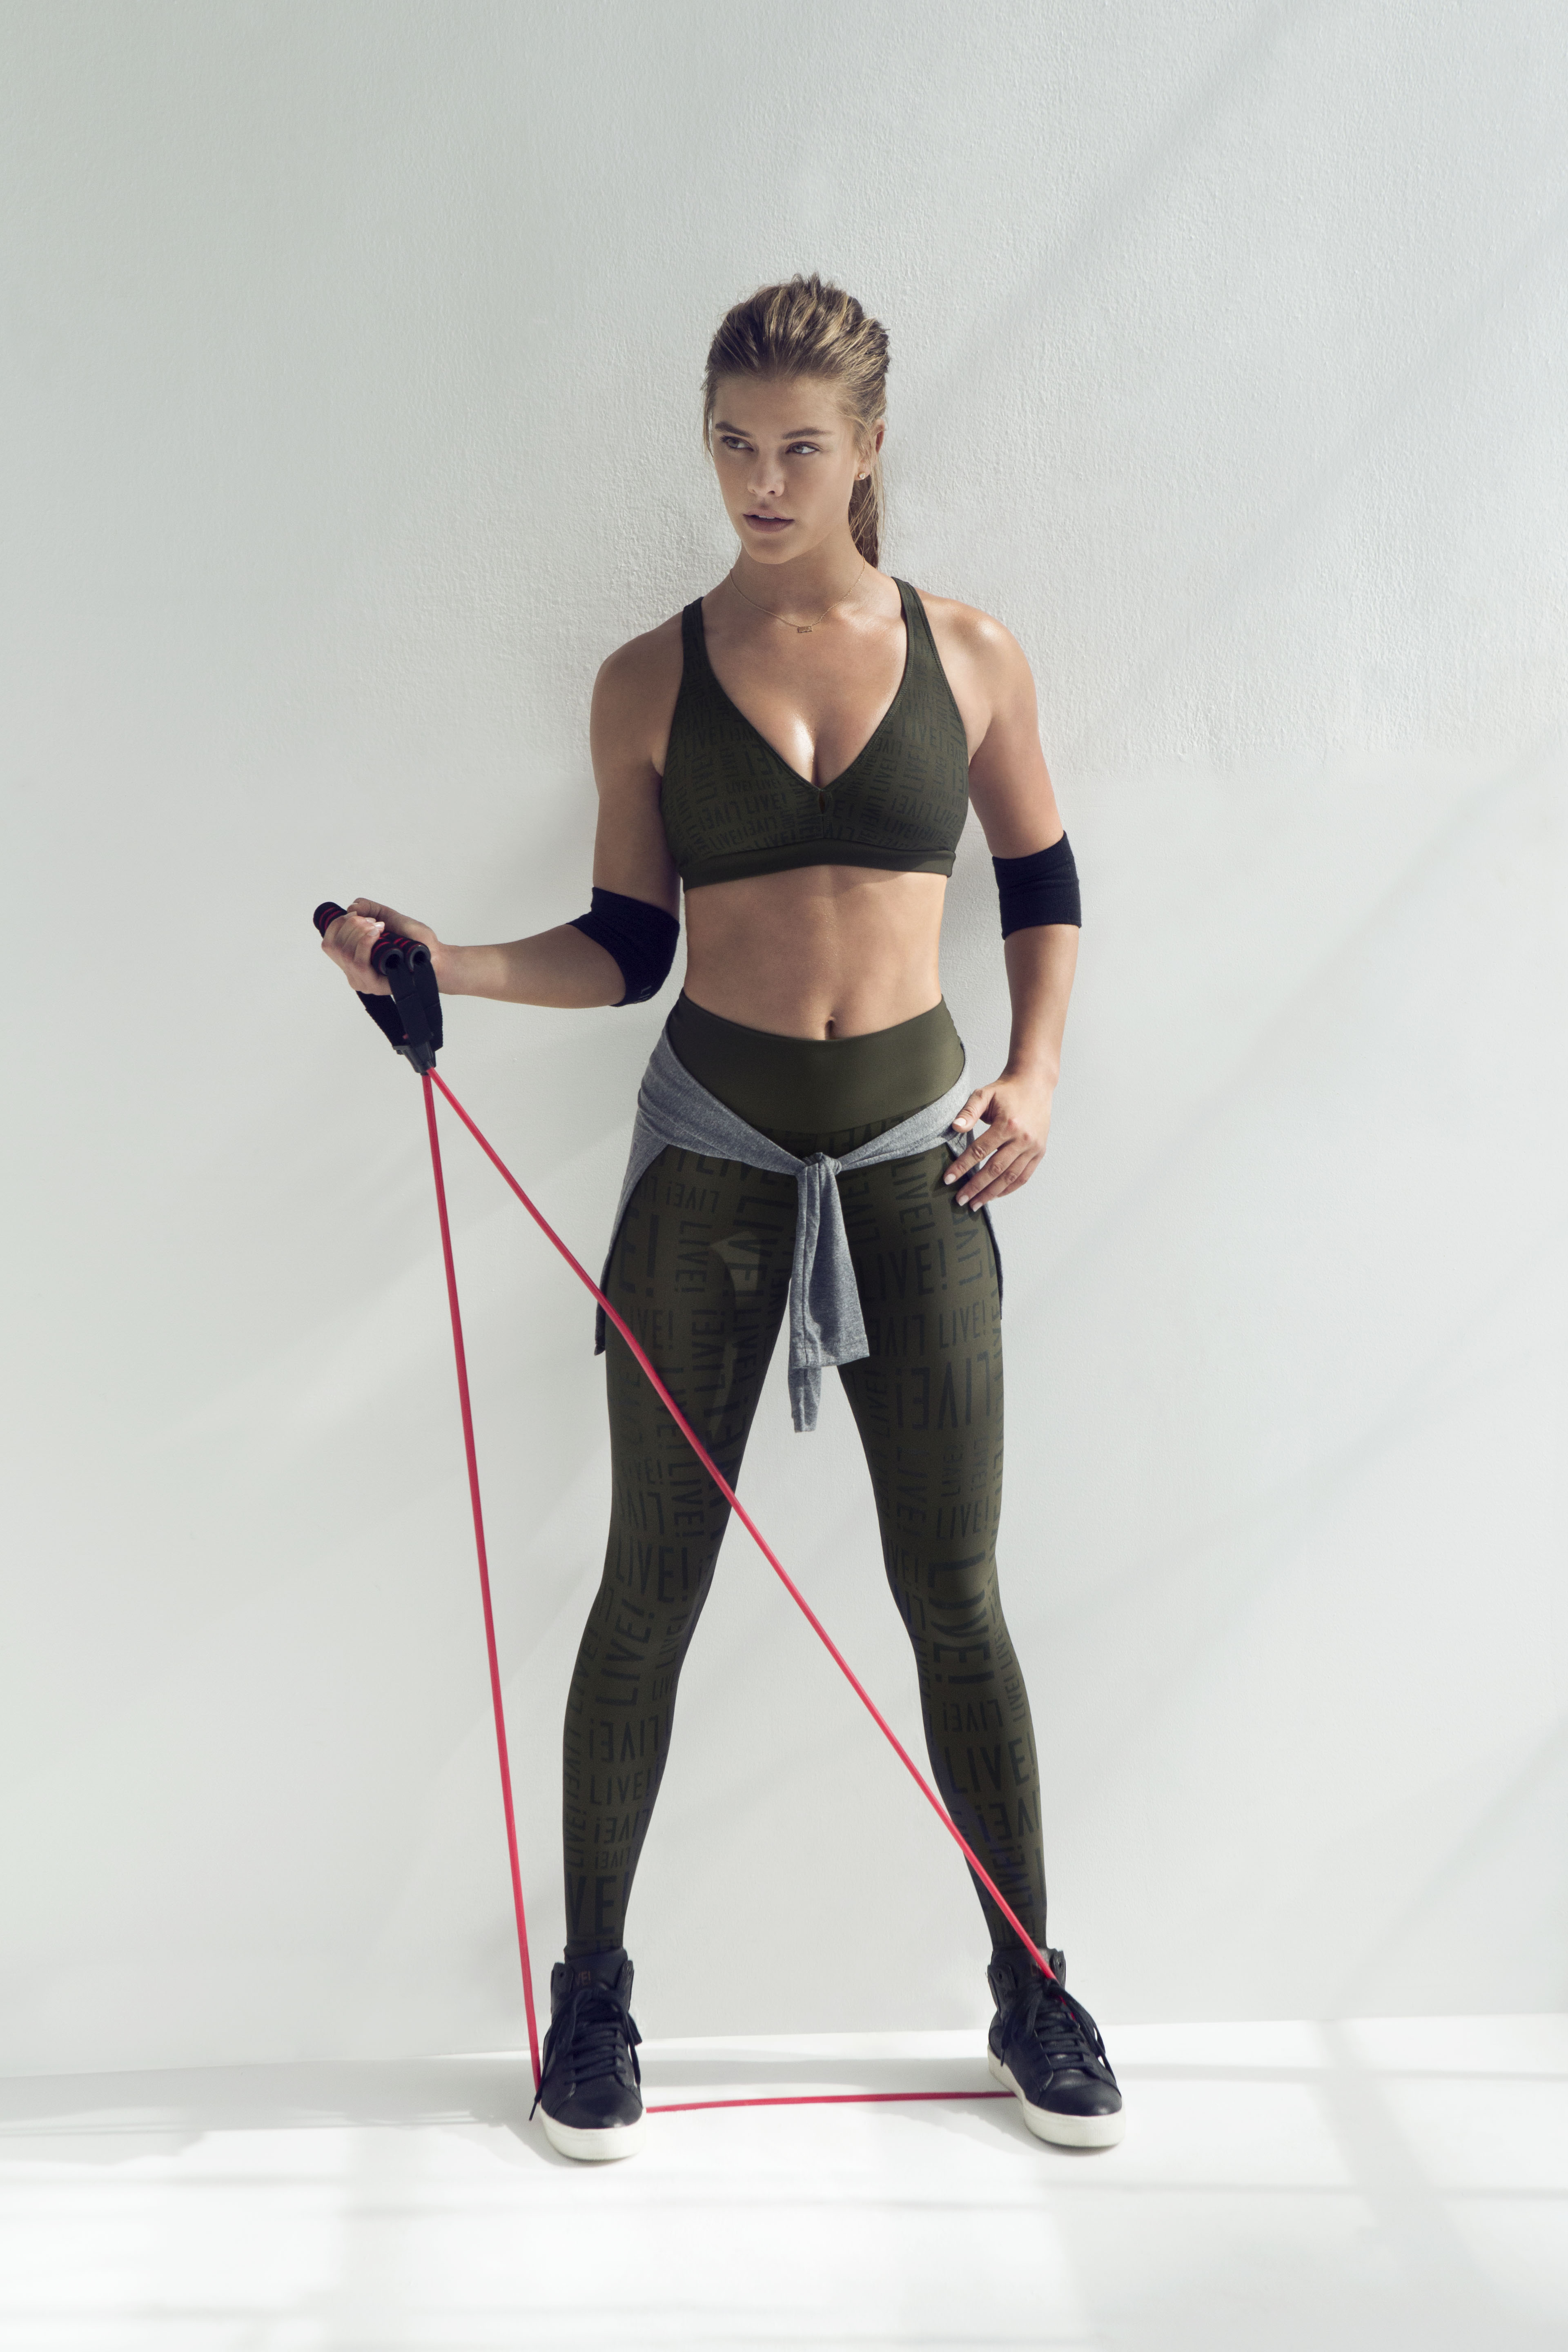 Nina Agdal Working Out And Looking Fine #79579836